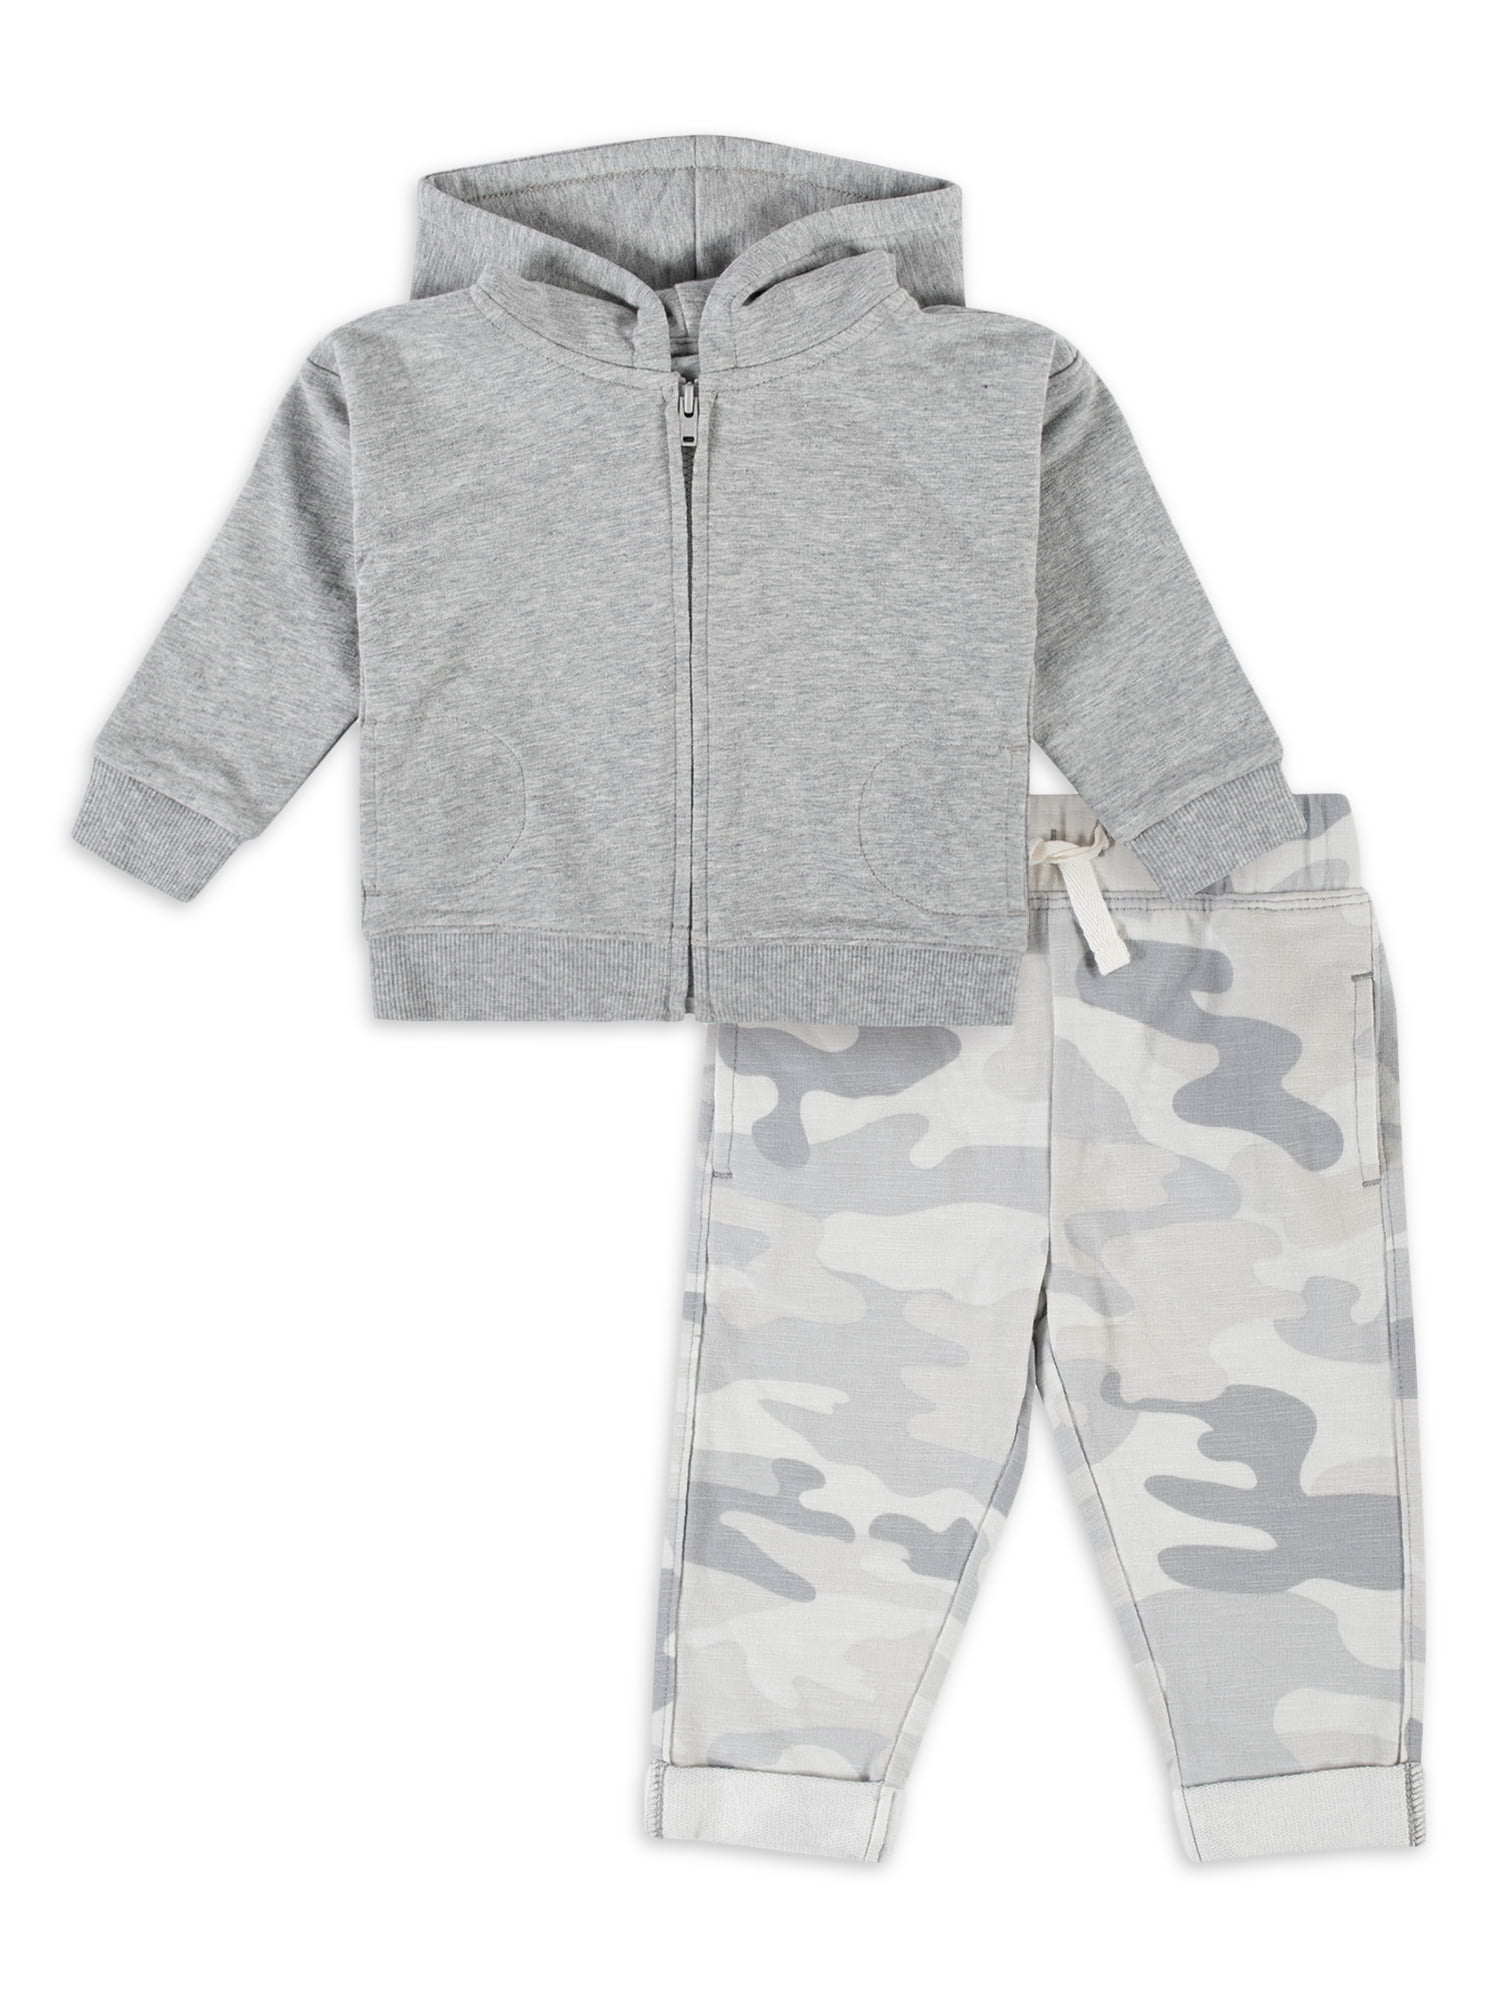 6 Years Boys Baby Toddler Mothercare FAST Zip Hoody Tracksuit Jog Set 3 Months 